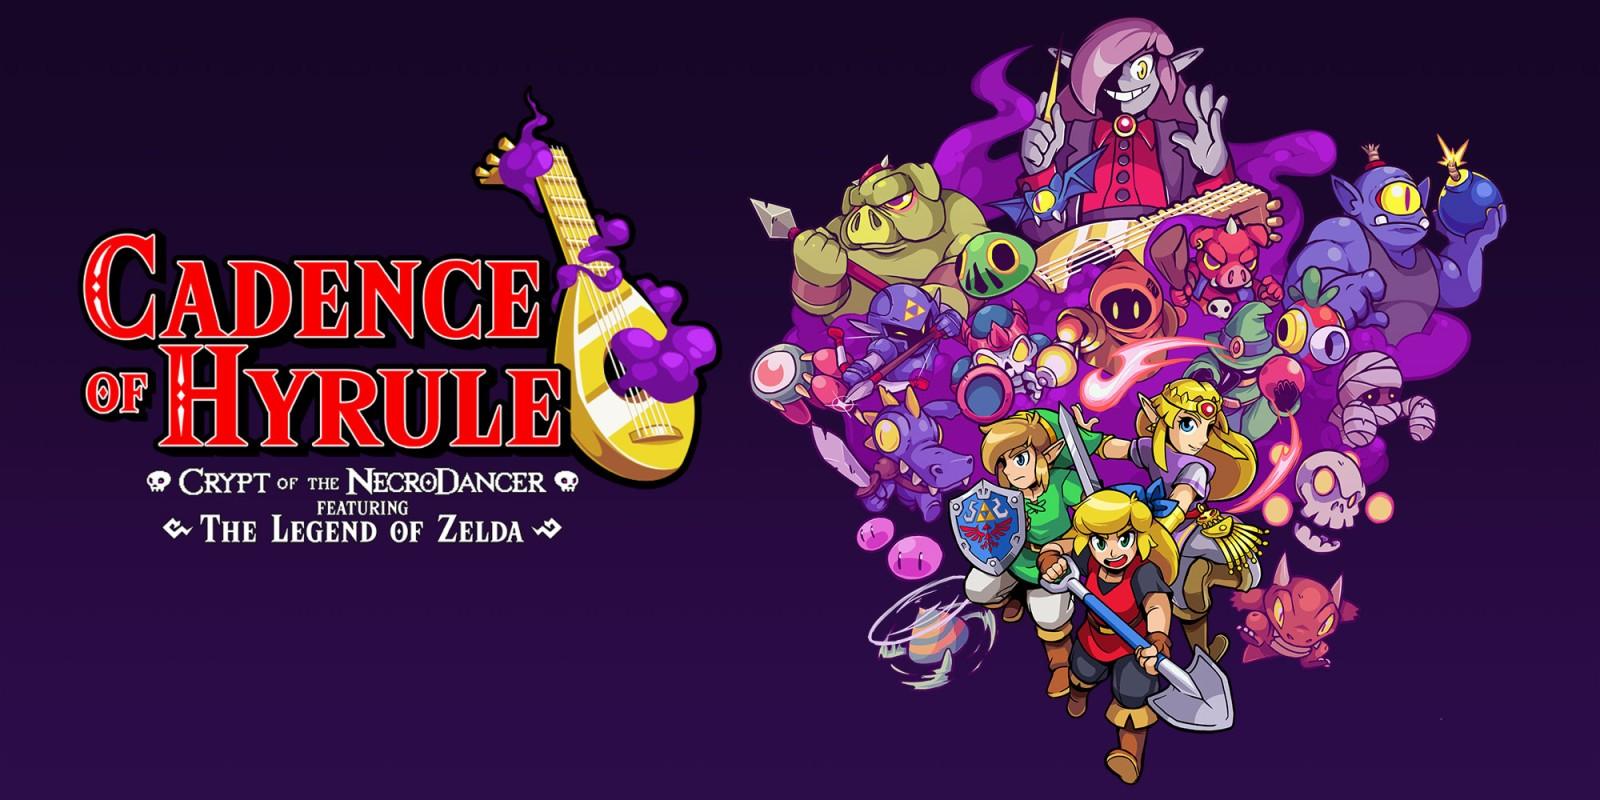 Cadence of Hyrule Apk iOS Latest Version Free Download